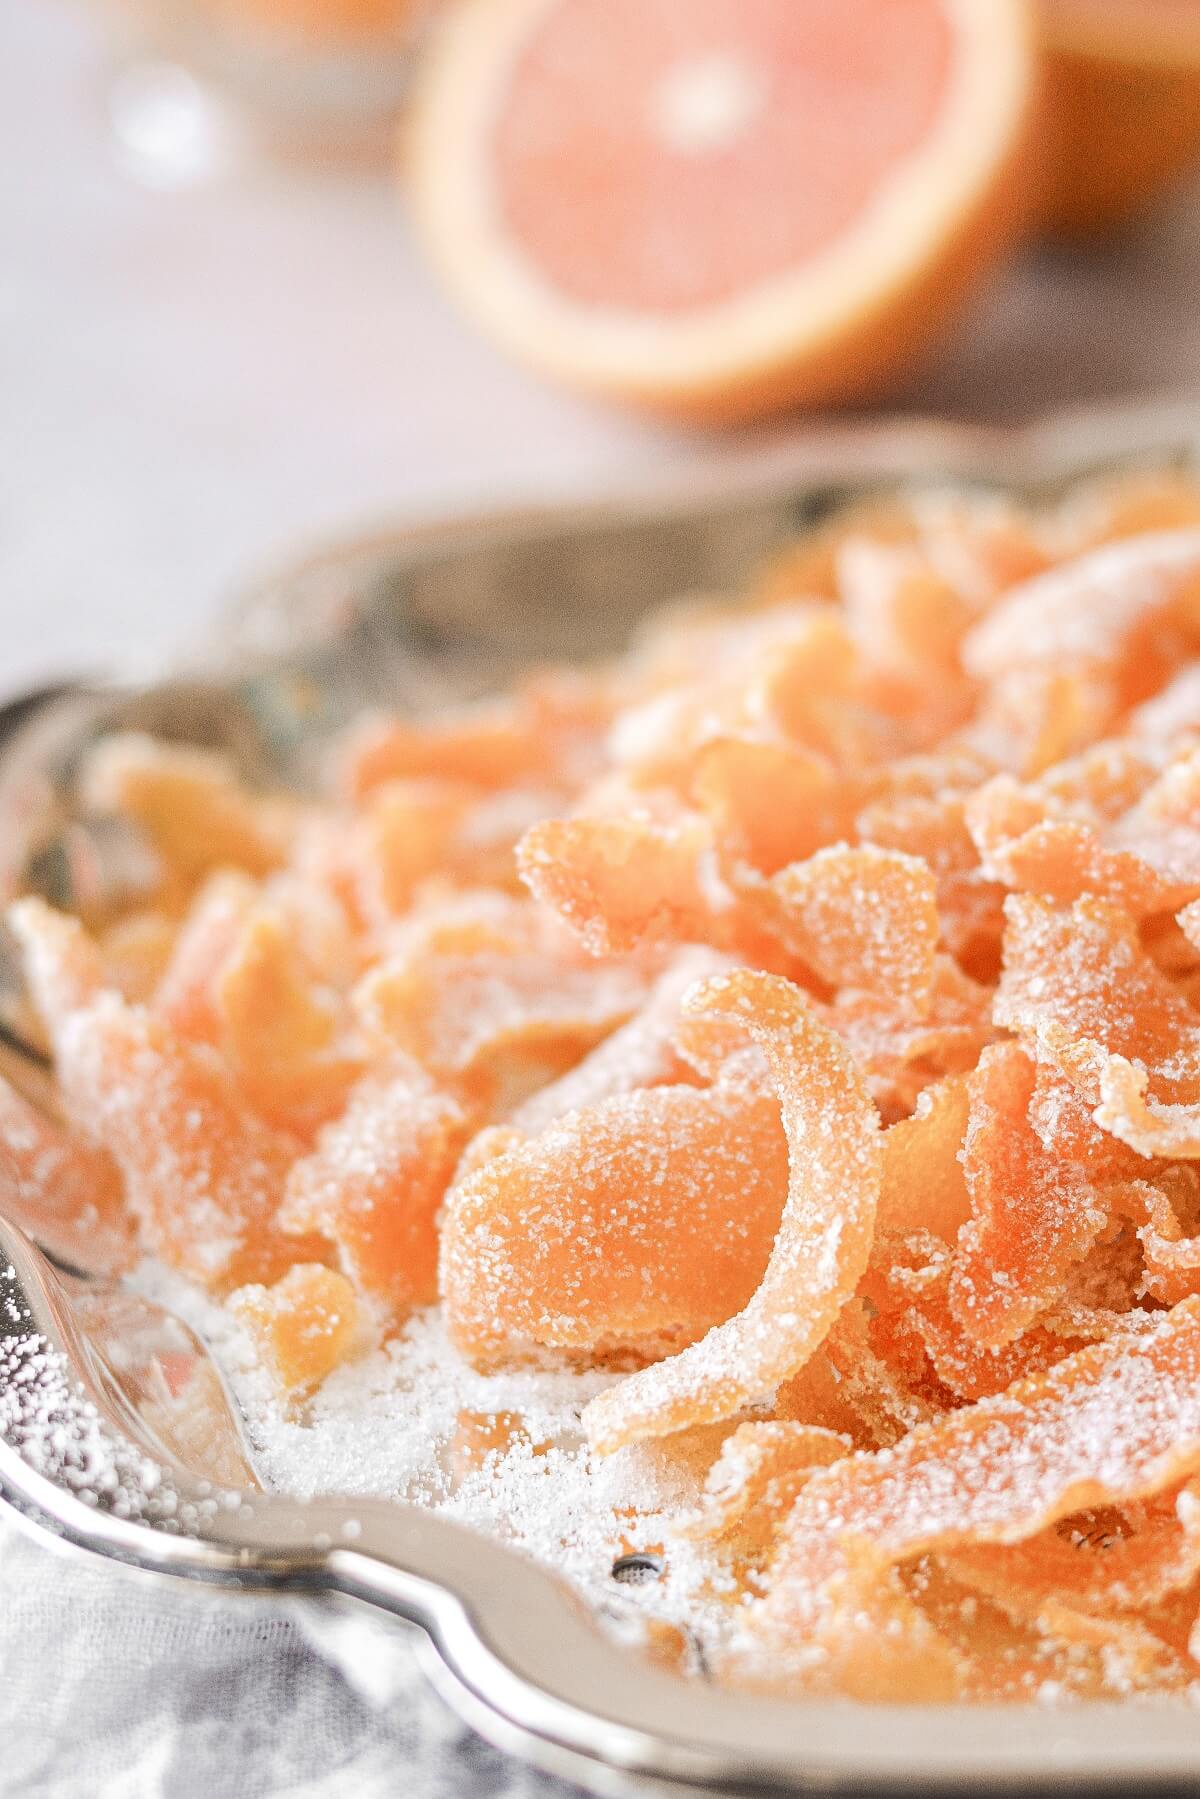 Candied orange peel on a silver tray.